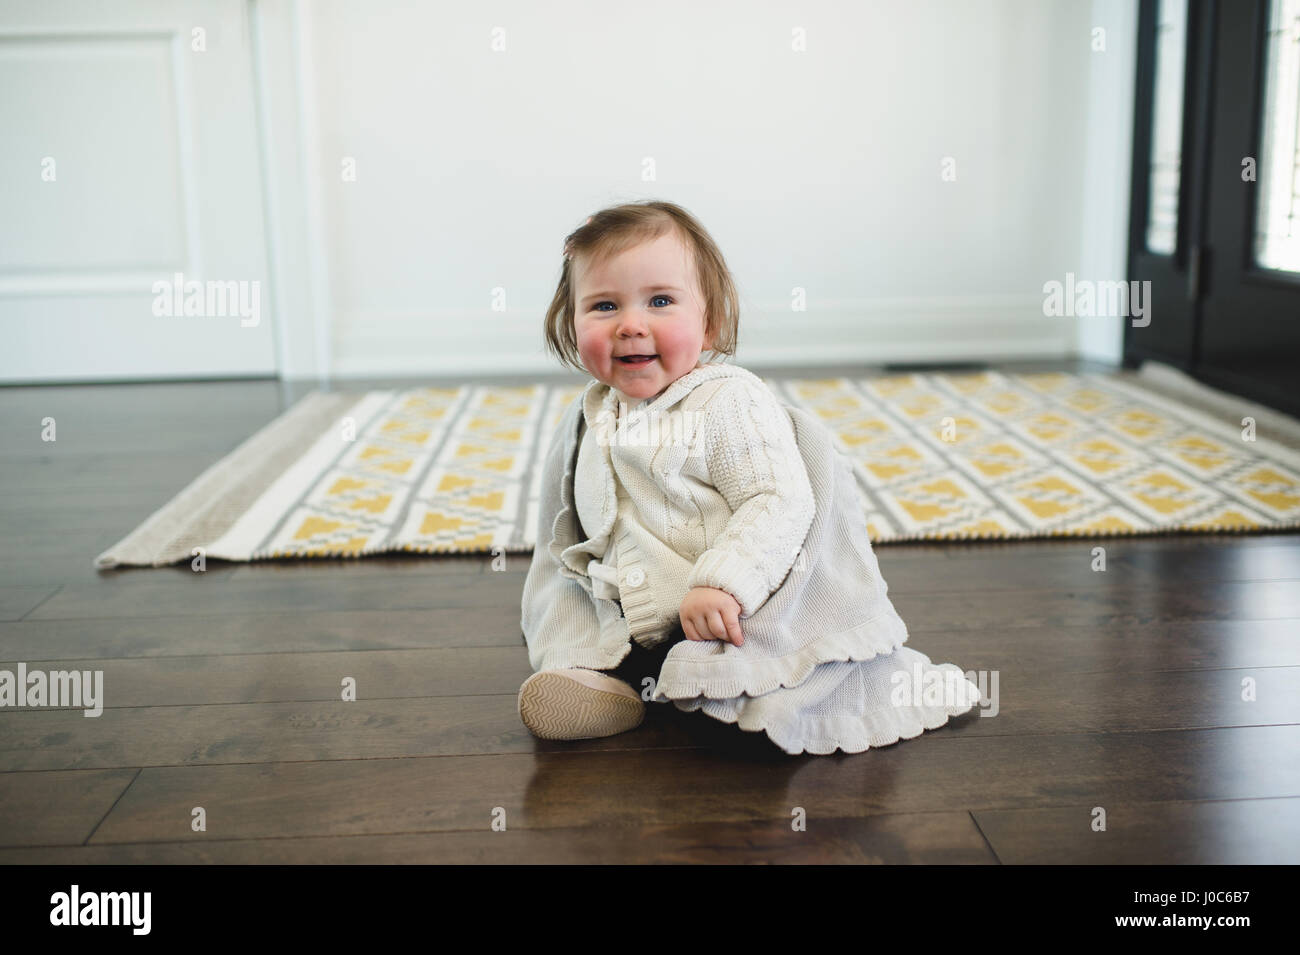 Rosy-cheeked baby sitting on the floor smiling Stock Photo